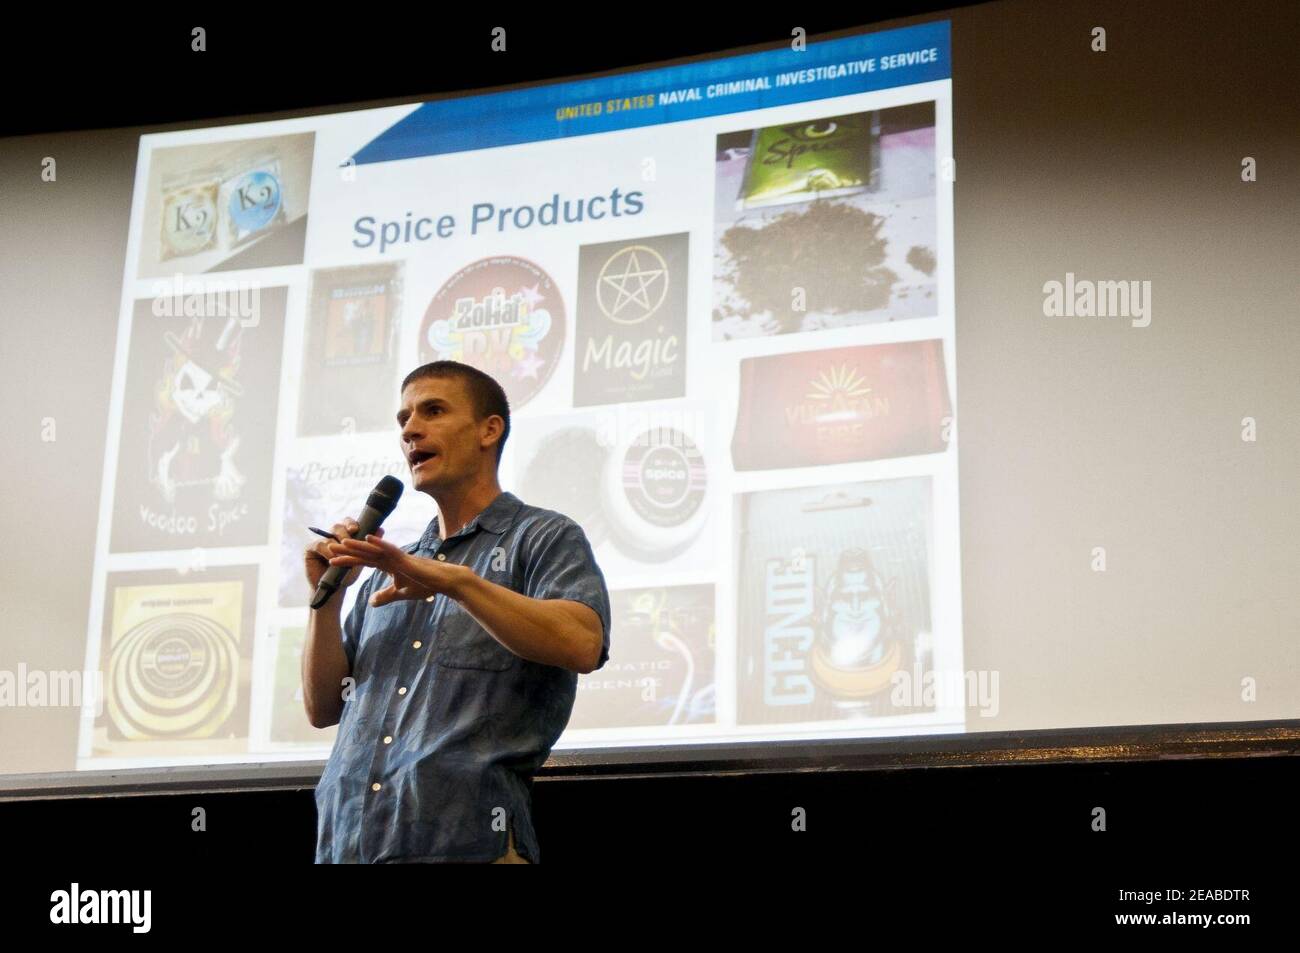 NCIS educates sailors about risk of synthetic drugs 120501 Stock Photo